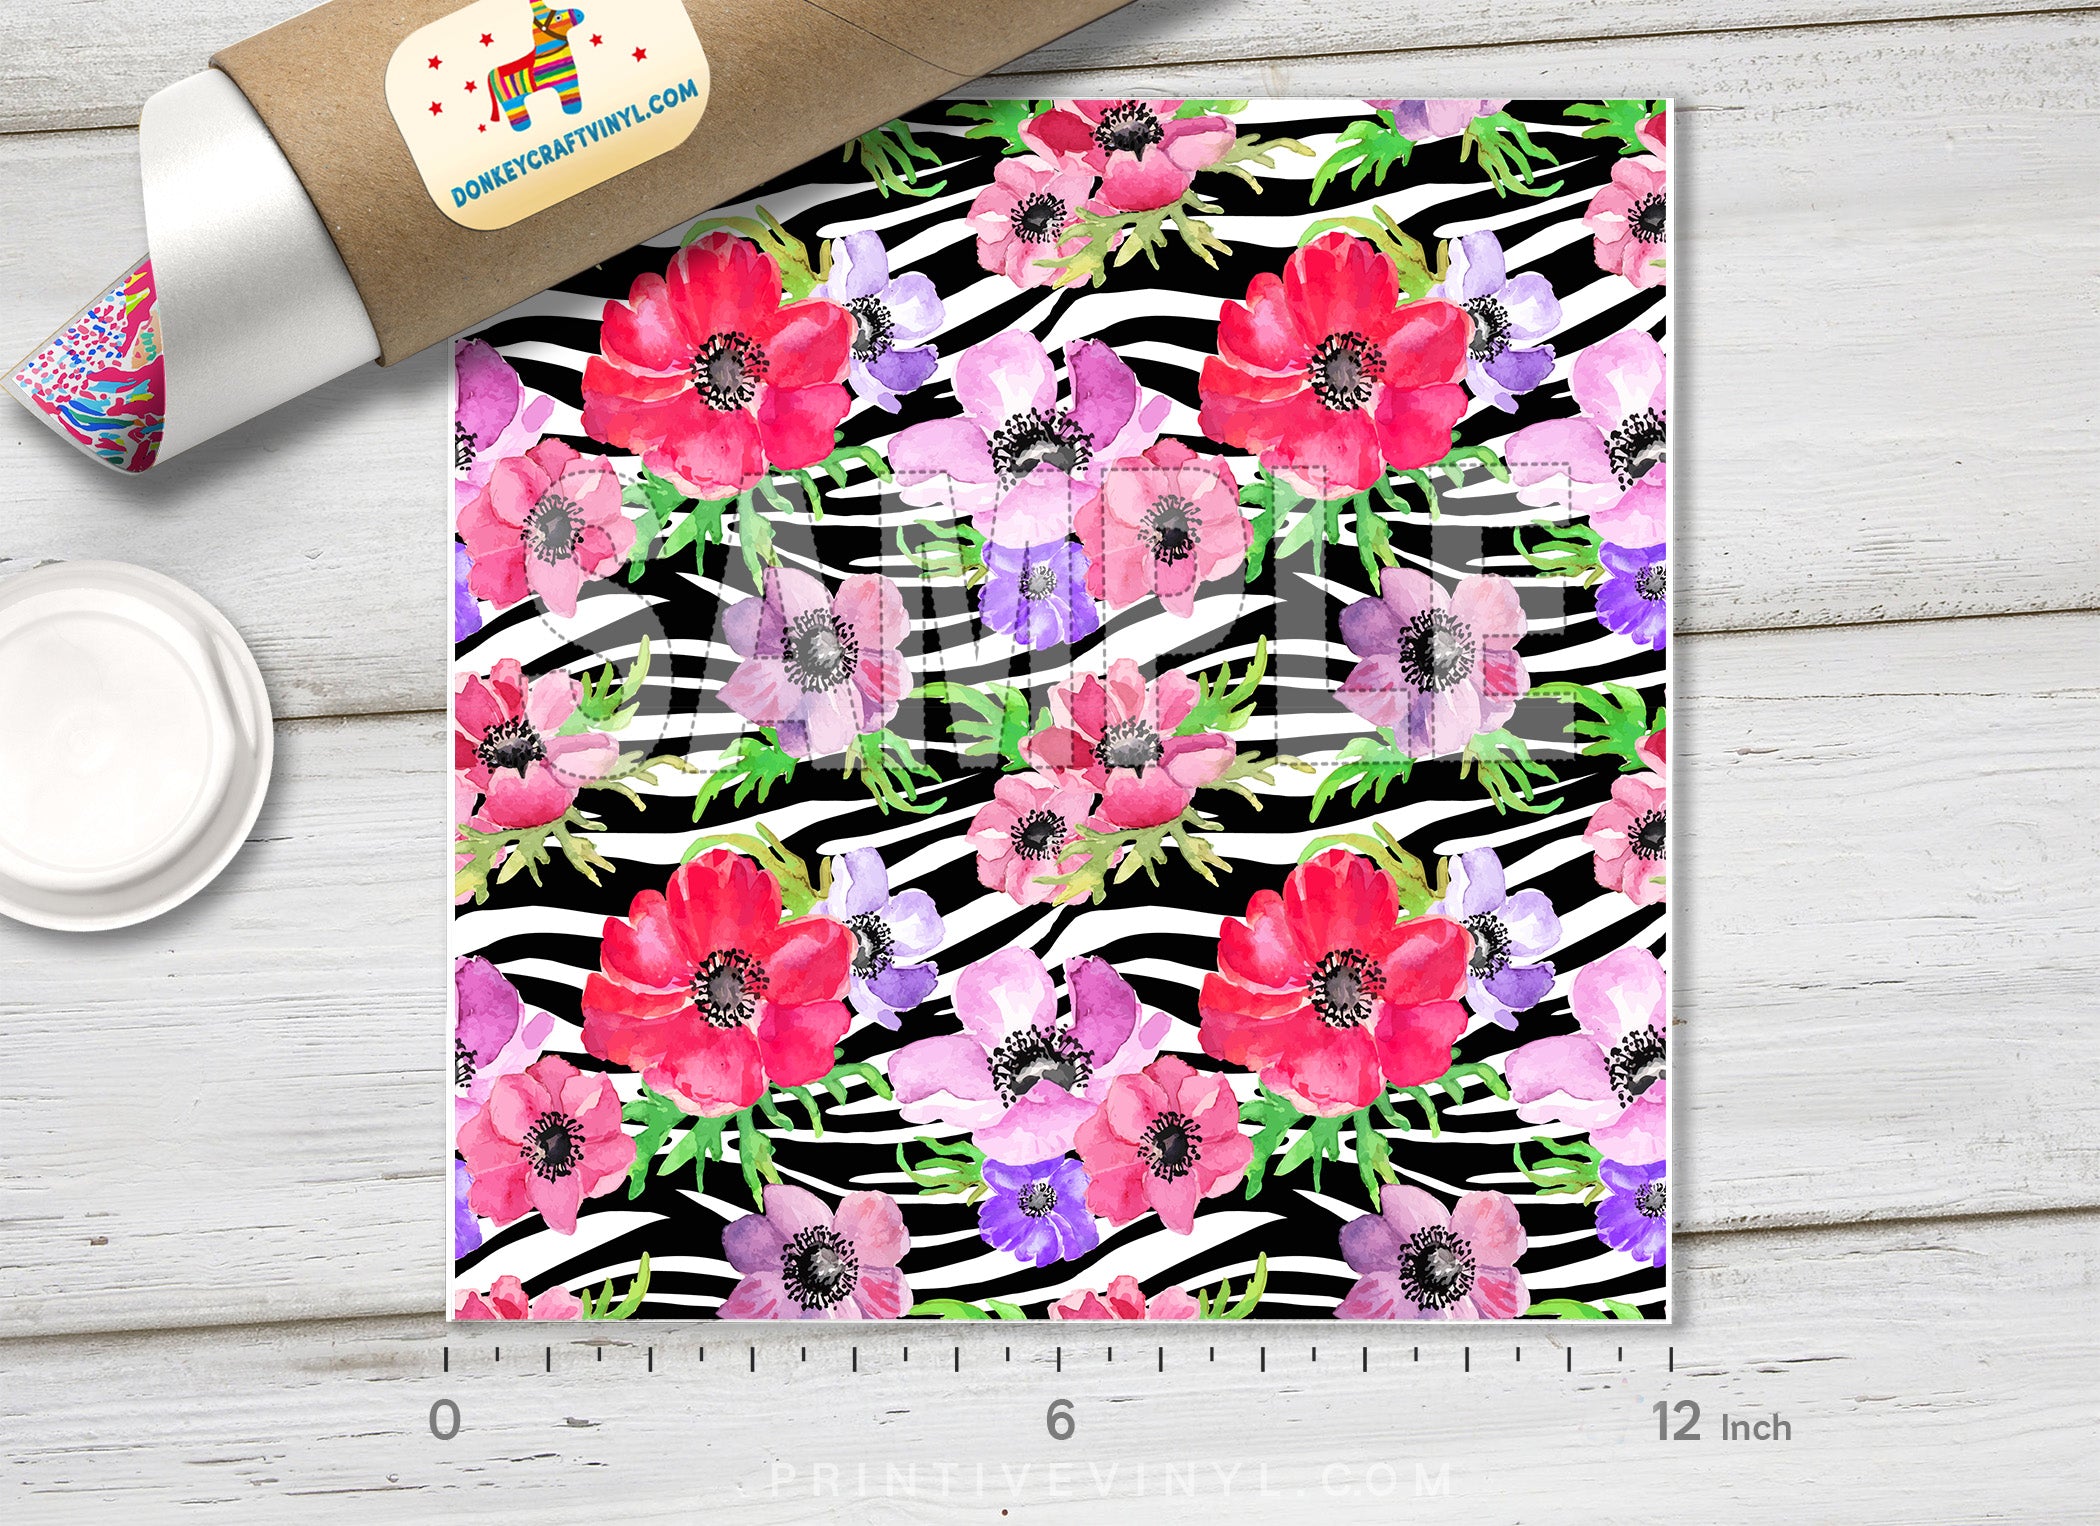 Flowers and Zebra Patterned Adhesive Vinyl 062